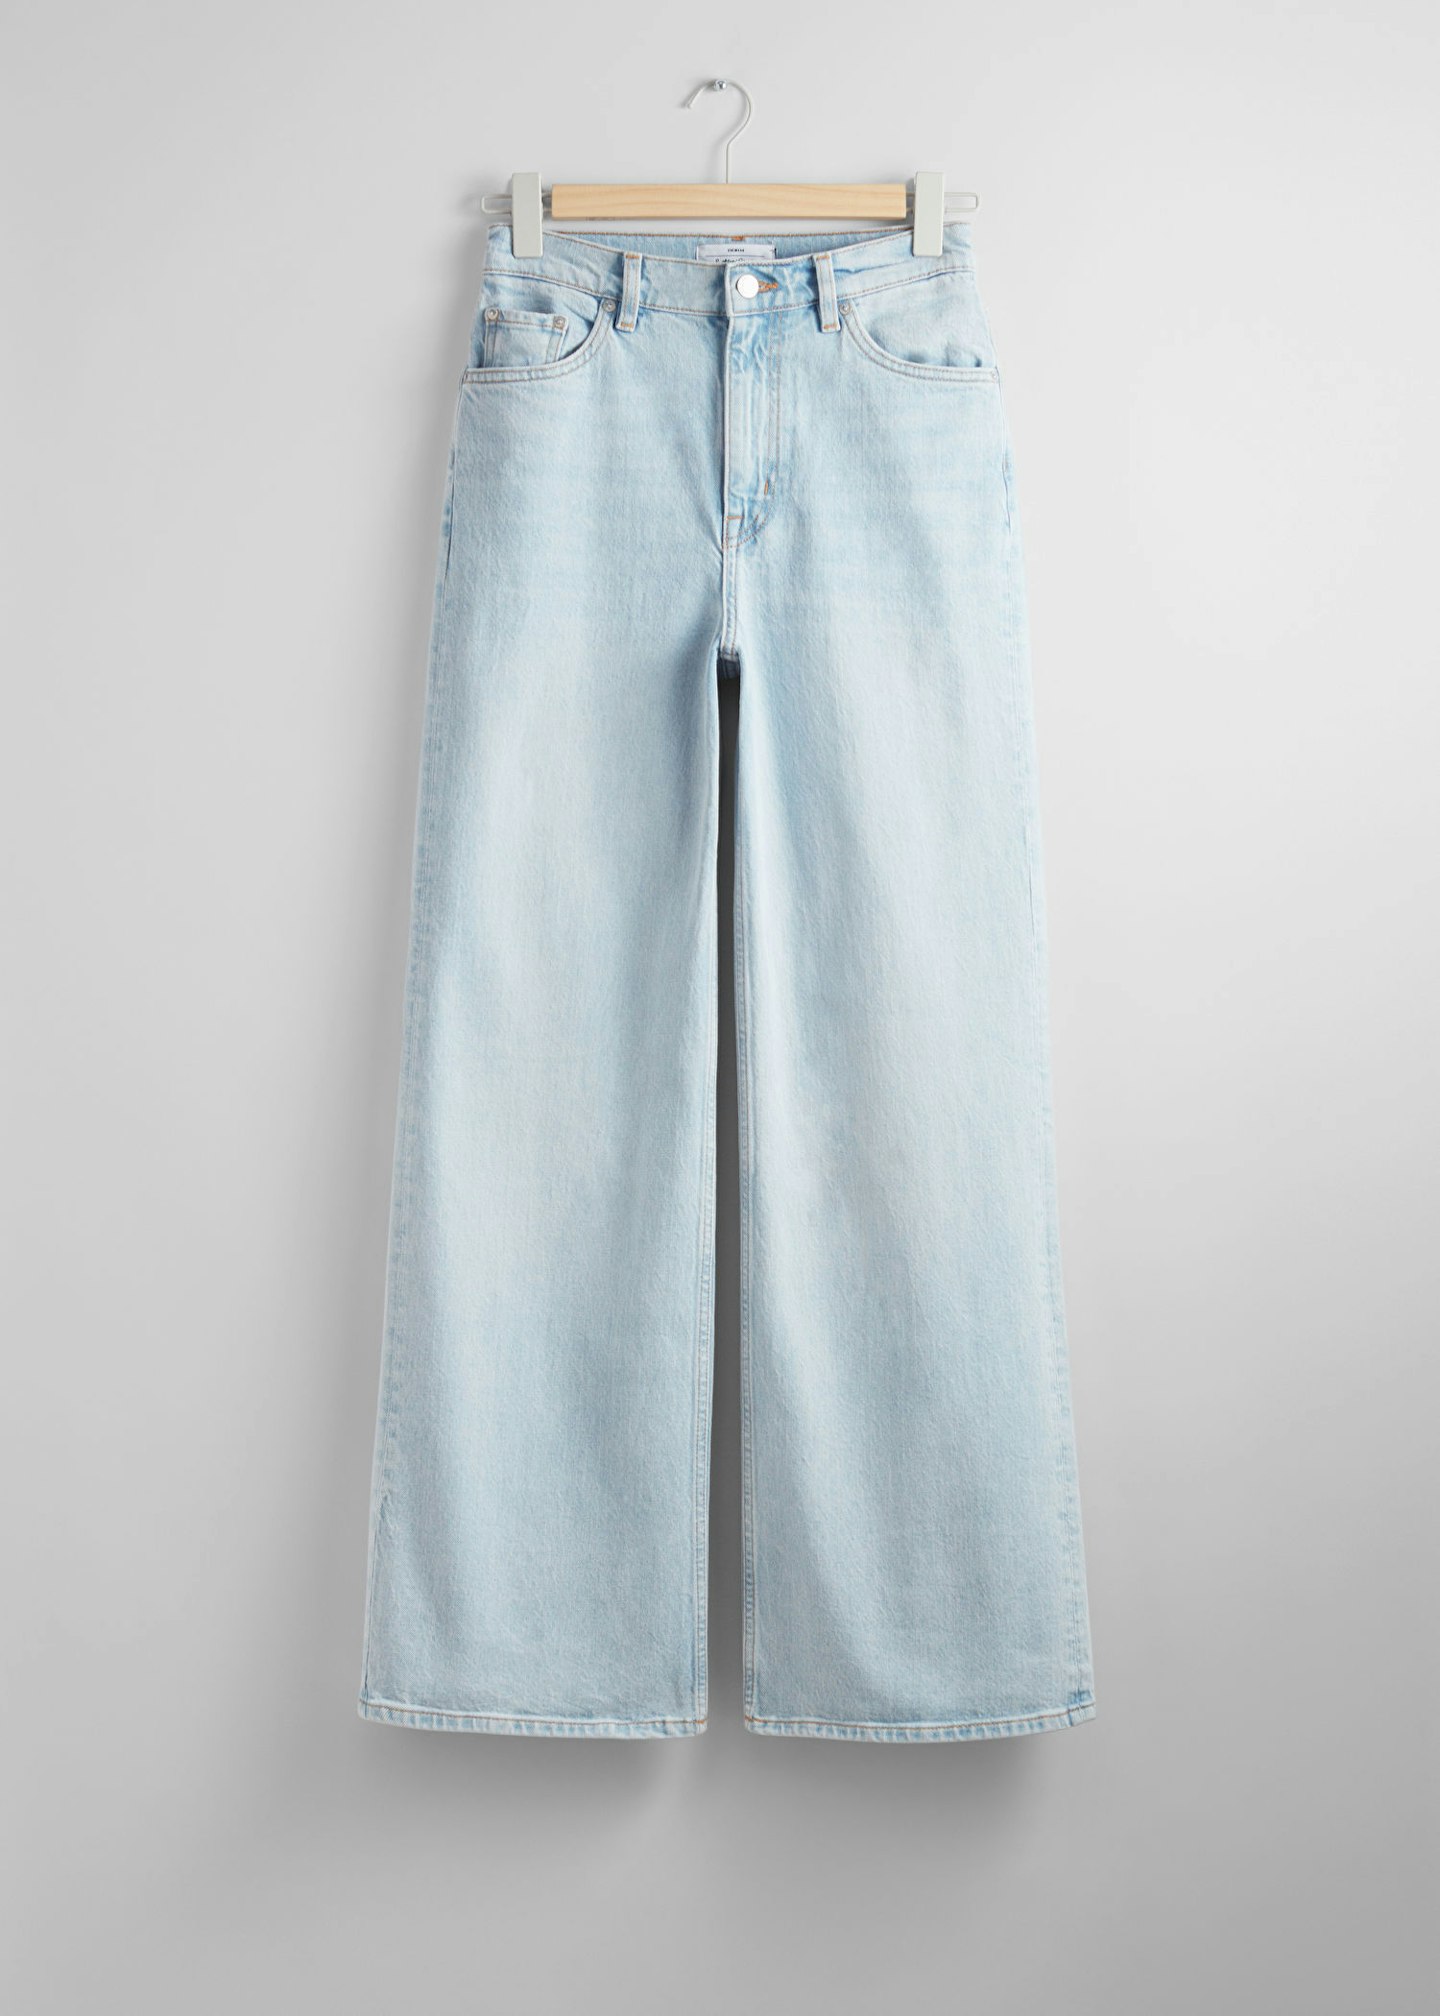 & other stories jeans 